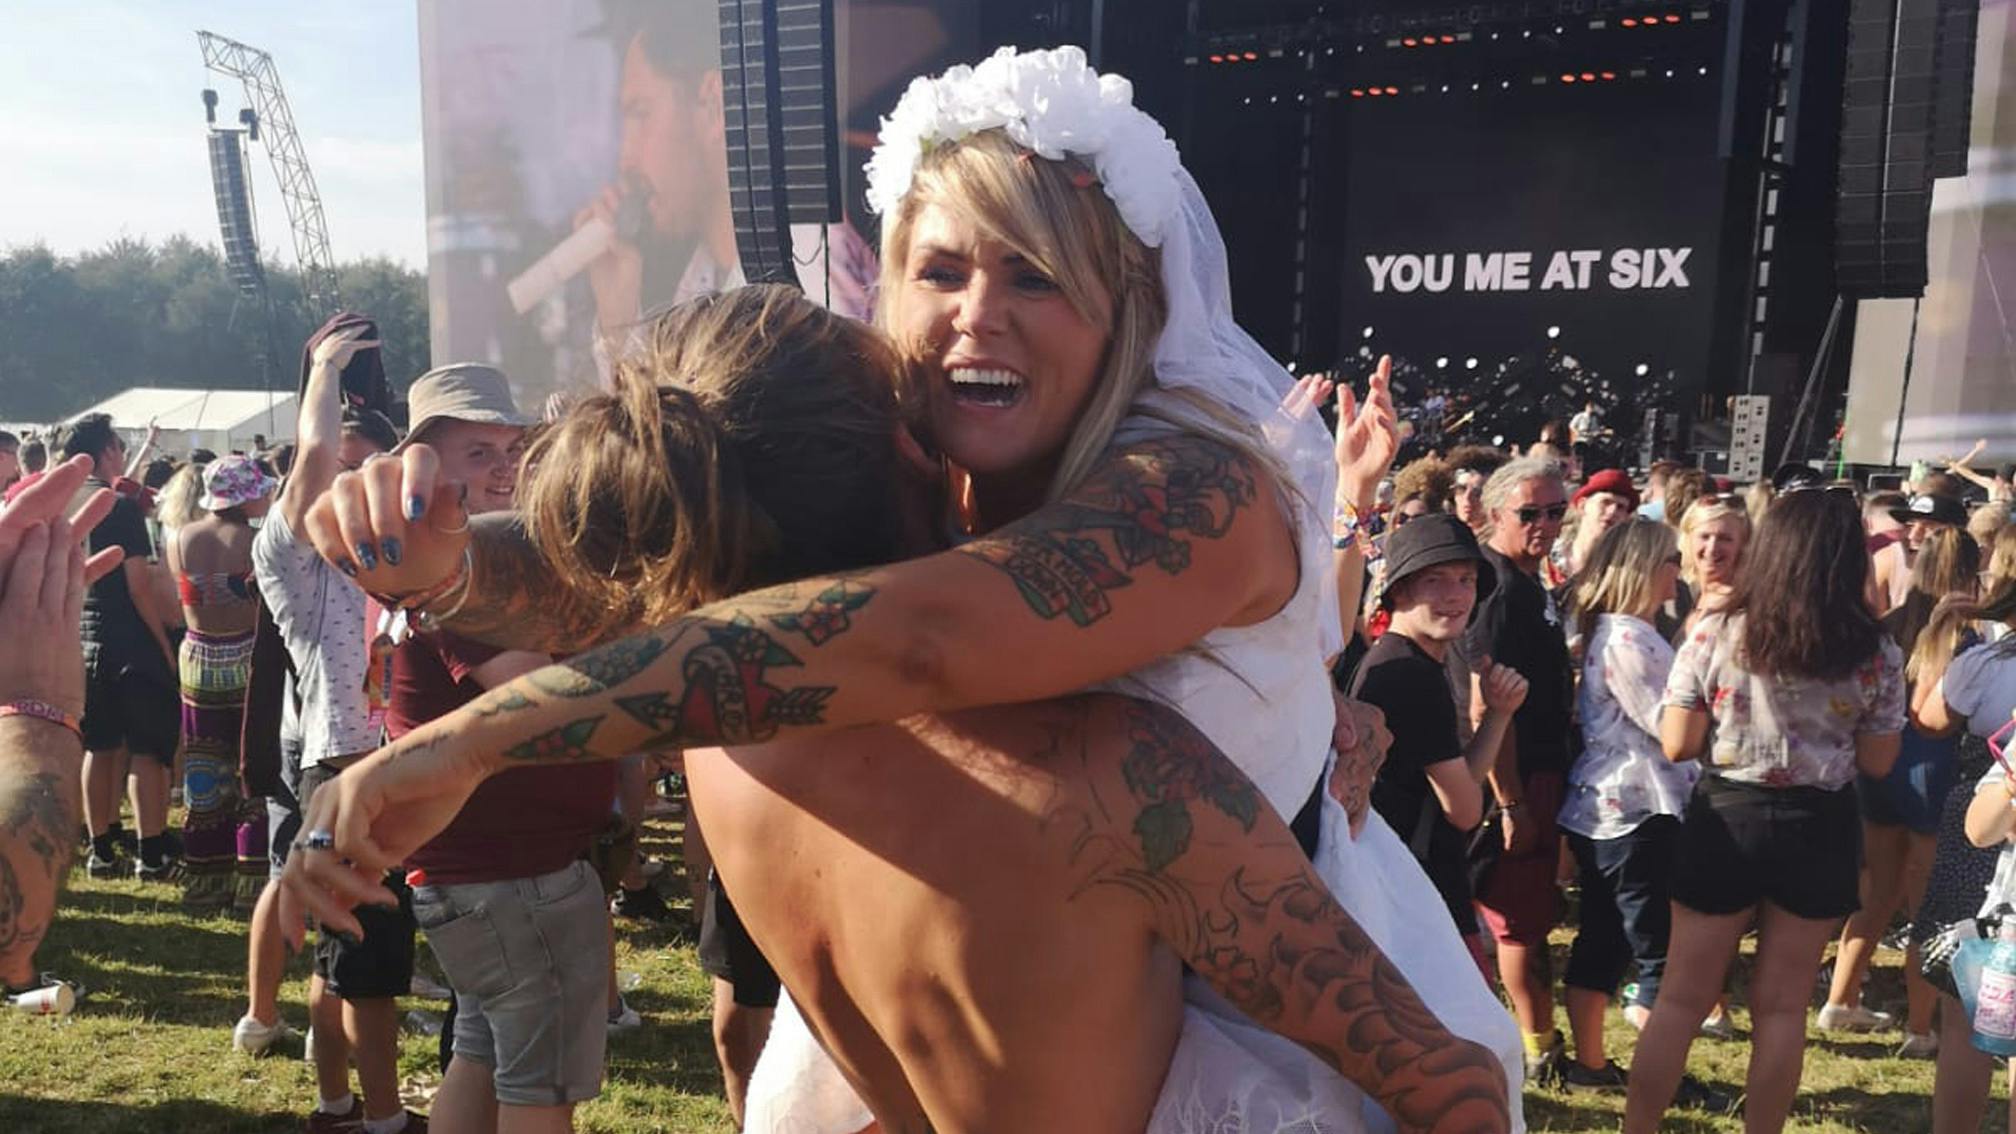 Meet the people who find true love at rock shows